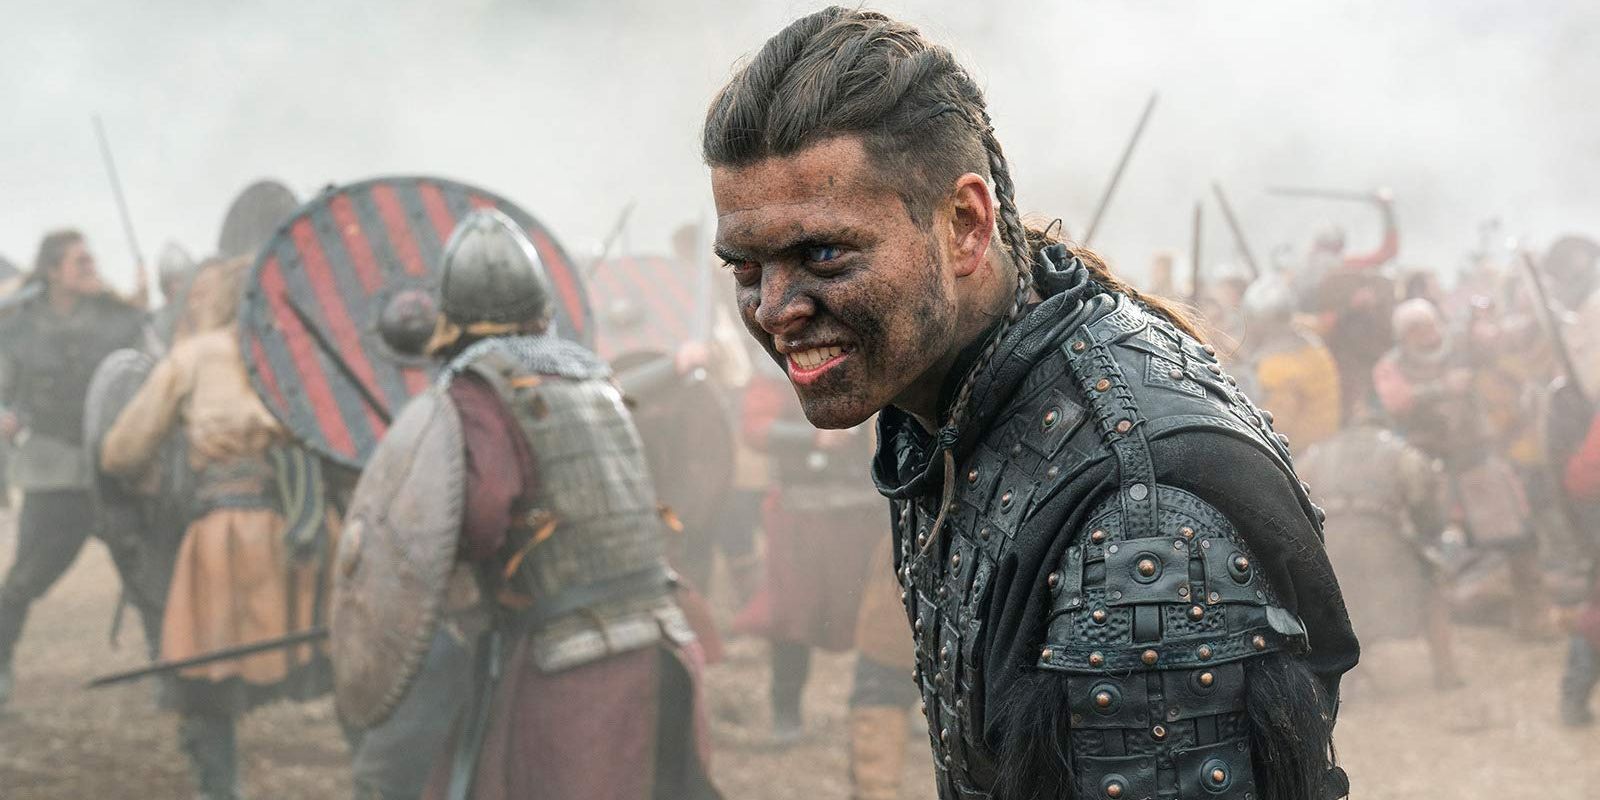 Ivar the Boneless fights to his death in the final battle against Alfred